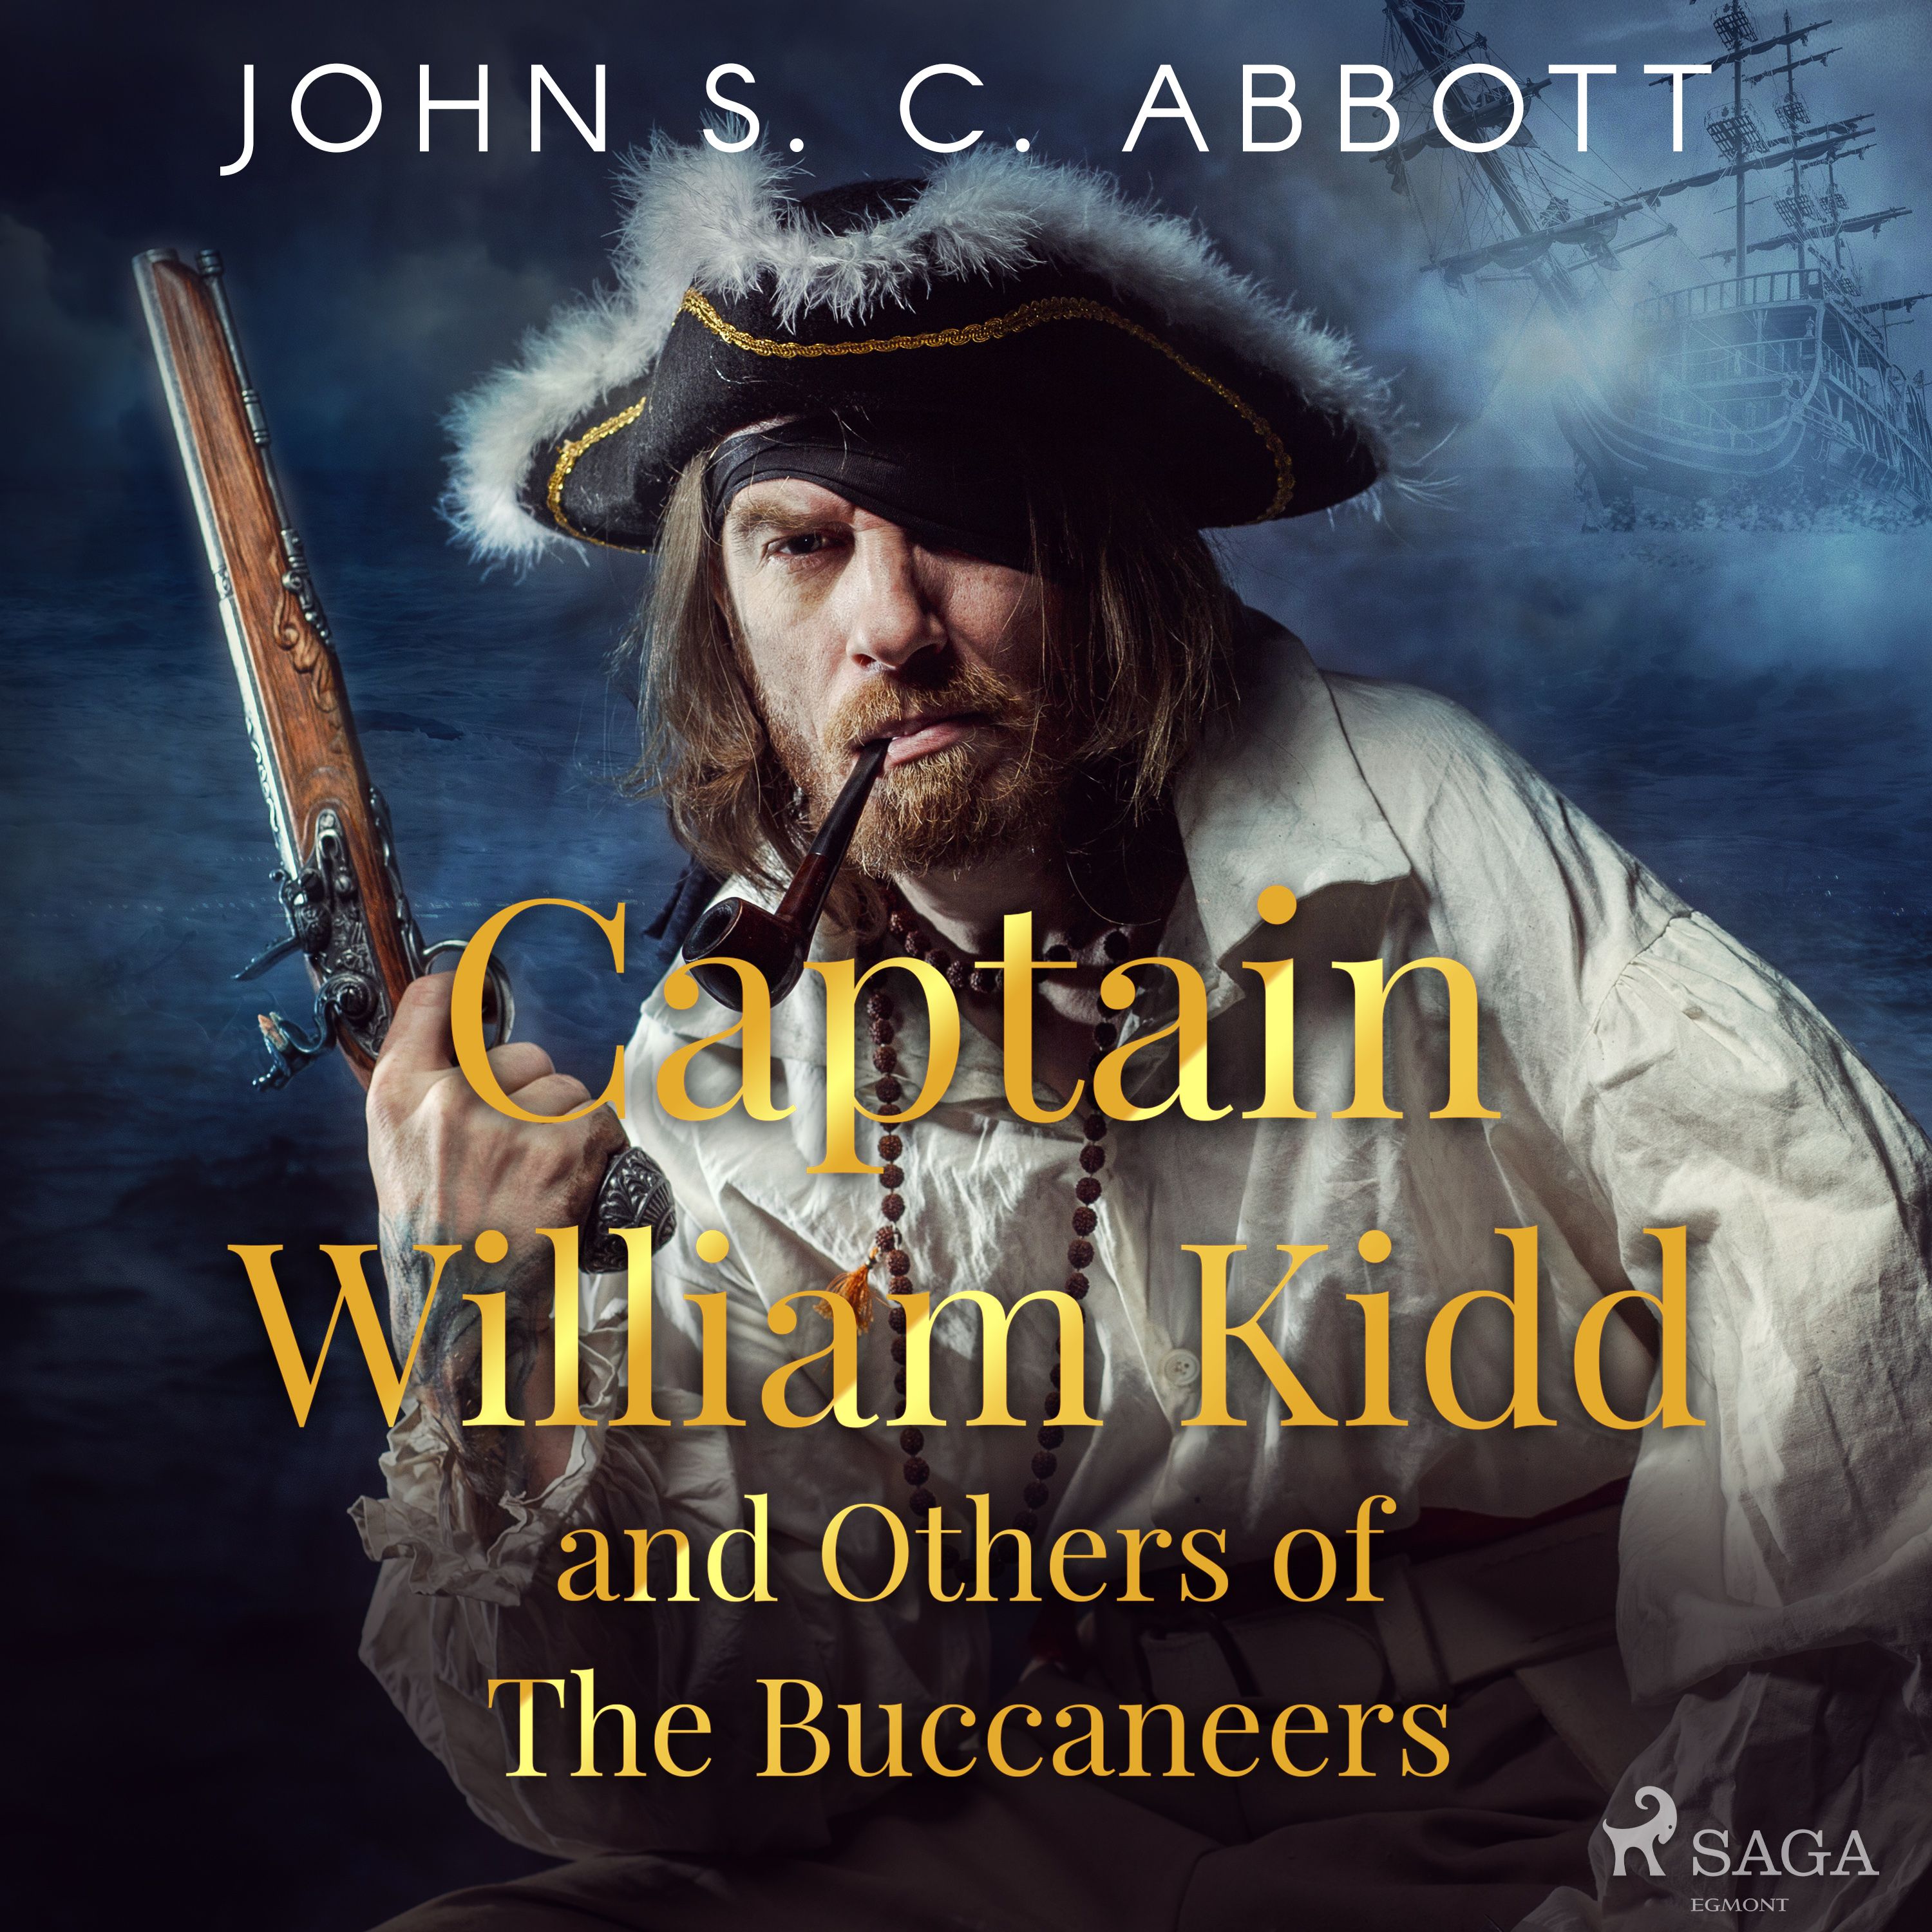 Captain William Kidd and Others of The Buccaneers, audiobook by John S. C. Abbott